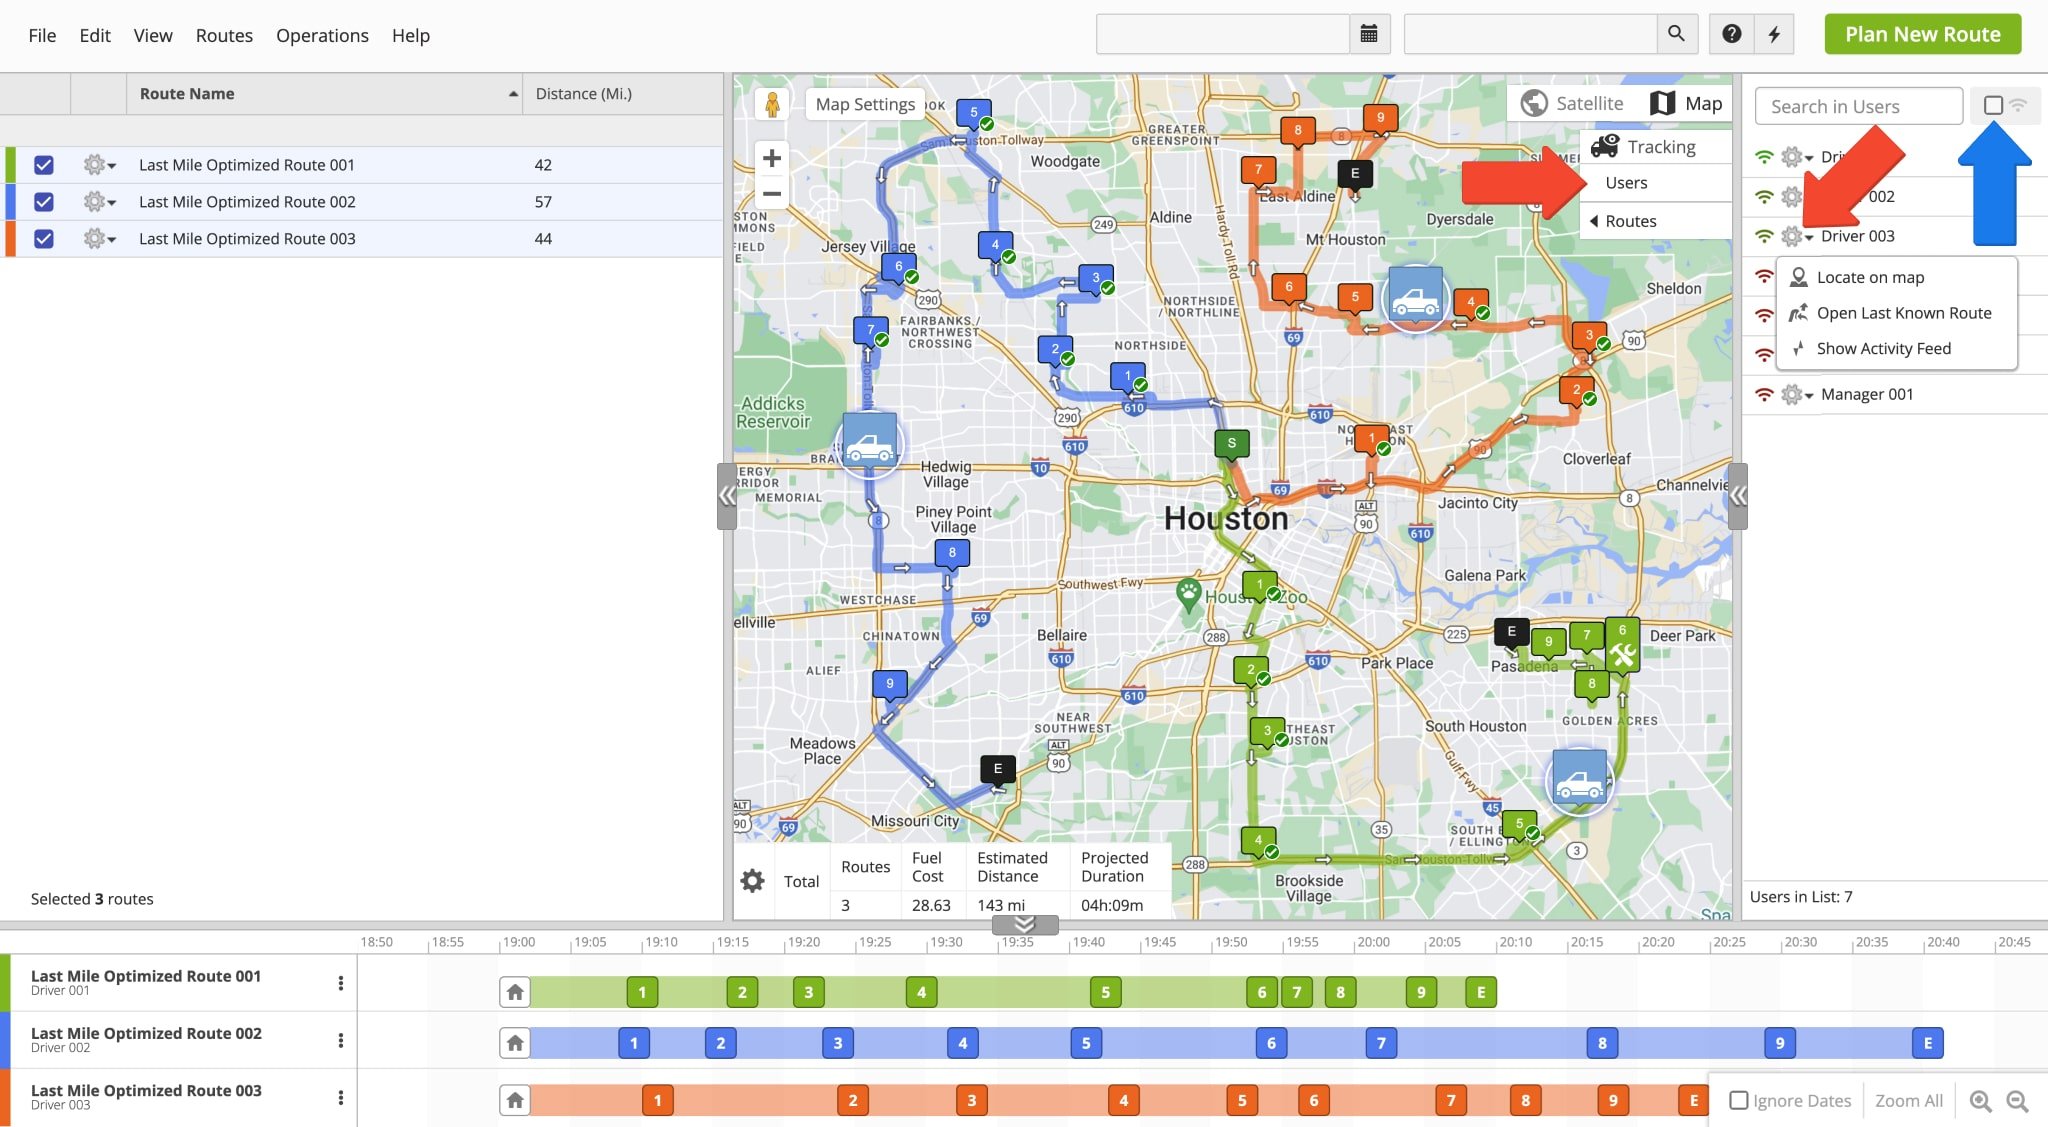 The Interactive Routes Map enables you to track users and drivers on the map. Track multiple drivers on different routes at the same time easily from the Tracking menu.